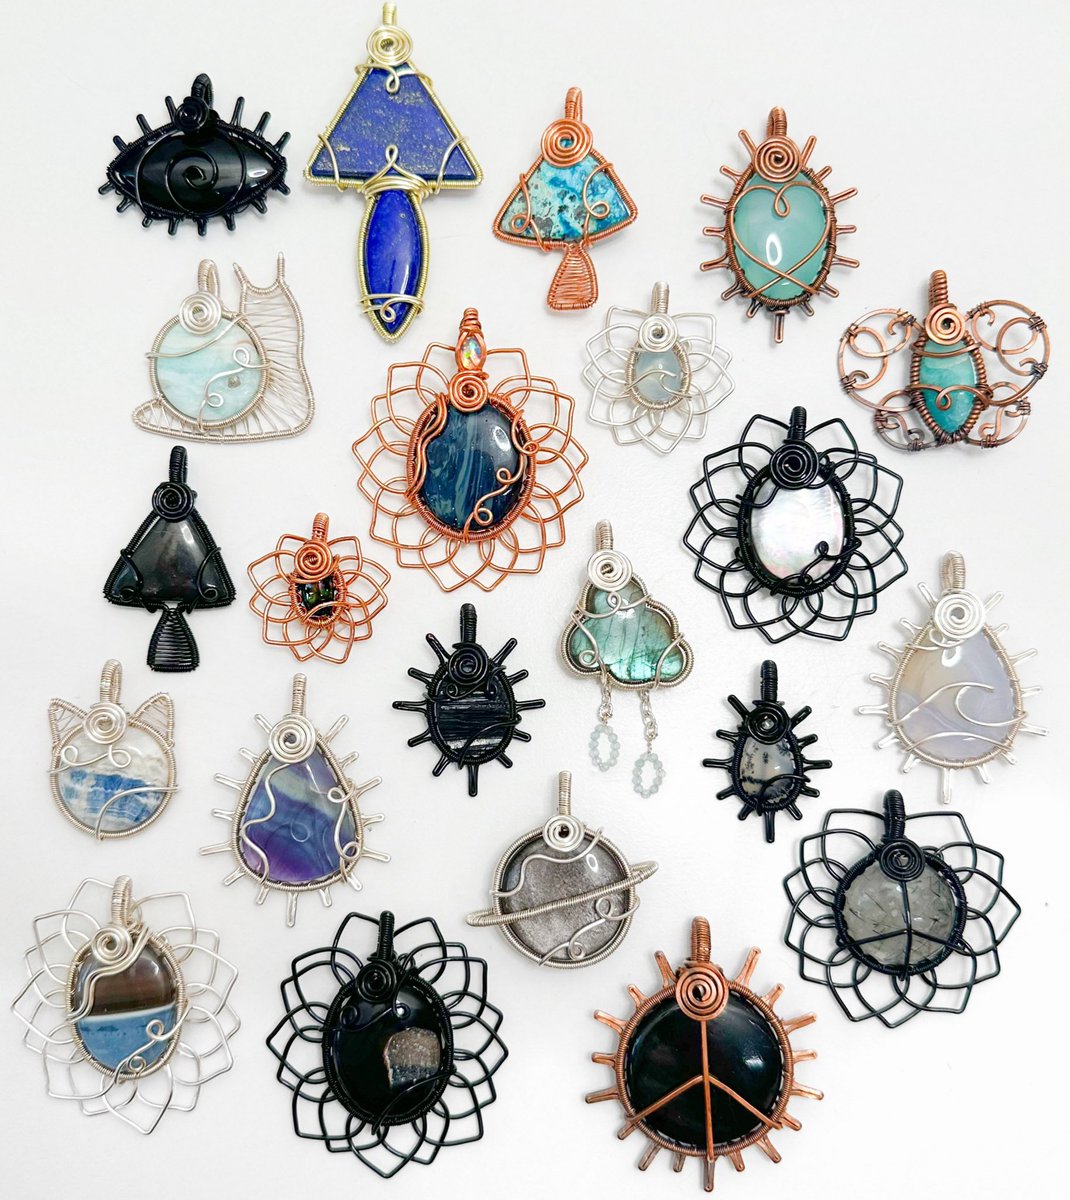 the crystals 🪼🖤🌊 the pendants “Black Sea” collection coming to my shop Friday March 22nd at 8pm eastern time <3